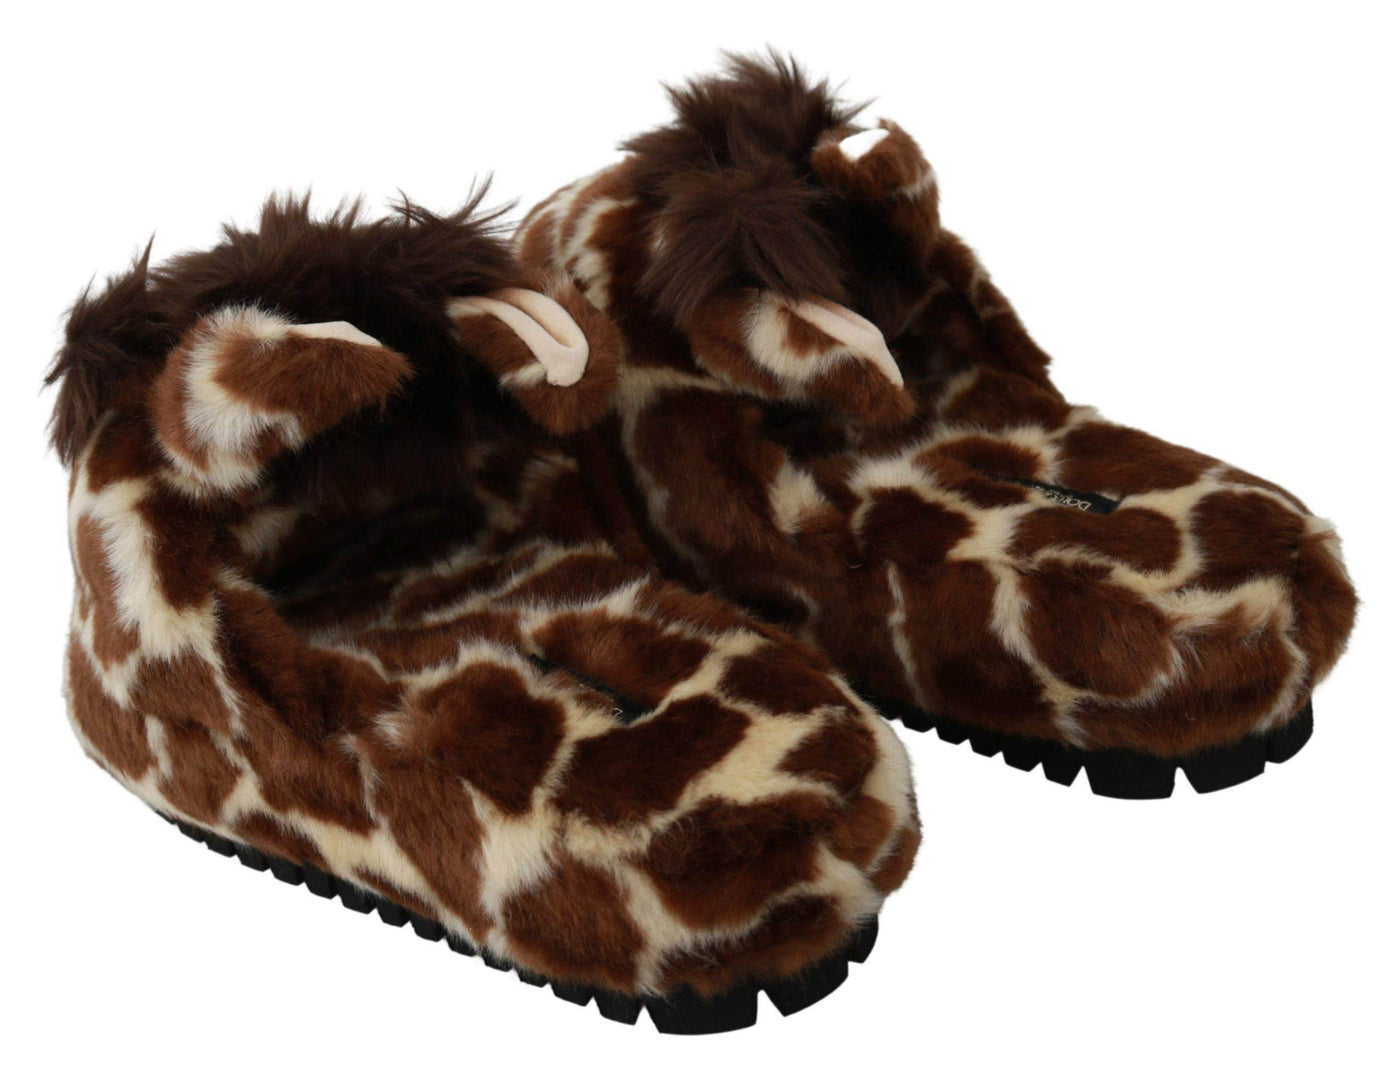 Dolce & Gabbana Brown Giraffe Slippers Flats Sandals Shoes #women, Brand_Dolce & Gabbana, Brown, Catch, Category_Shoes, Dolce & Gabbana, EU35/US4.5, EU36/US5.5, EU38/US7.5, EU41/US10.5, feed-agegroup-adult, feed-color-brown, feed-gender-female, feed-size-US4.5, feed-size-US5.5, Flat Shoes - Women - Shoes, Gender_Women, Kogan, Shoes - New Arrivals at SEYMAYKA